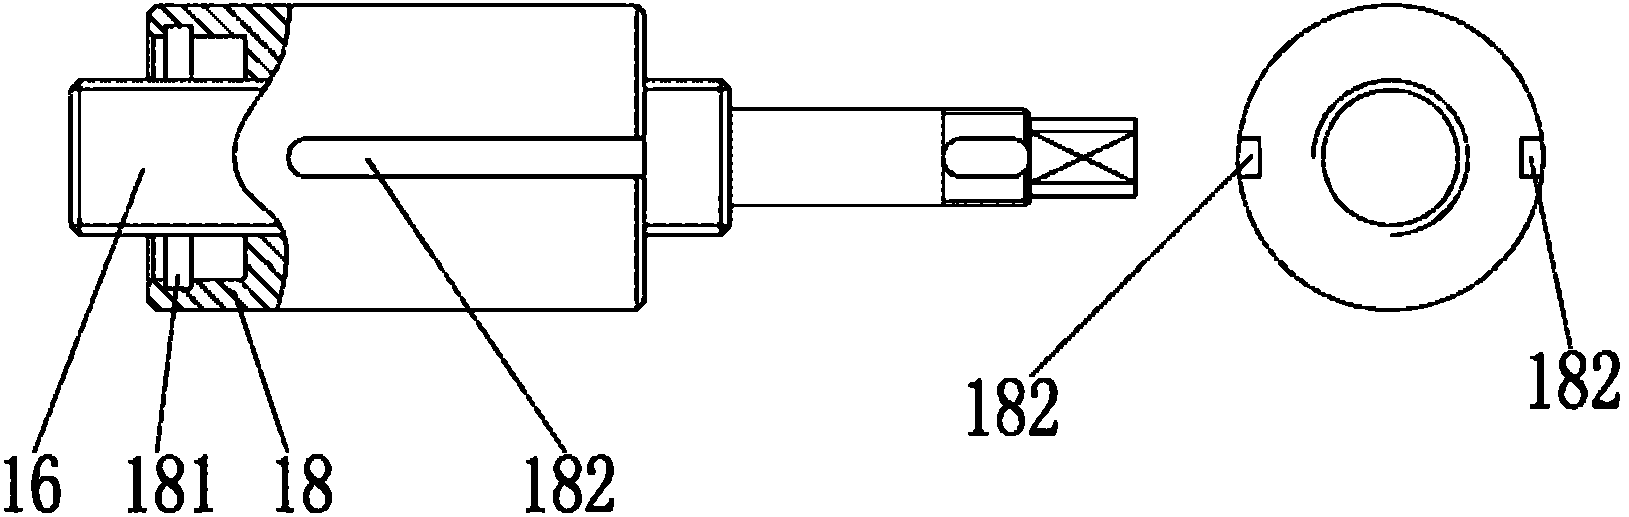 Brake actuating mechanism for distributed electronic hydraulic brake system of automobile